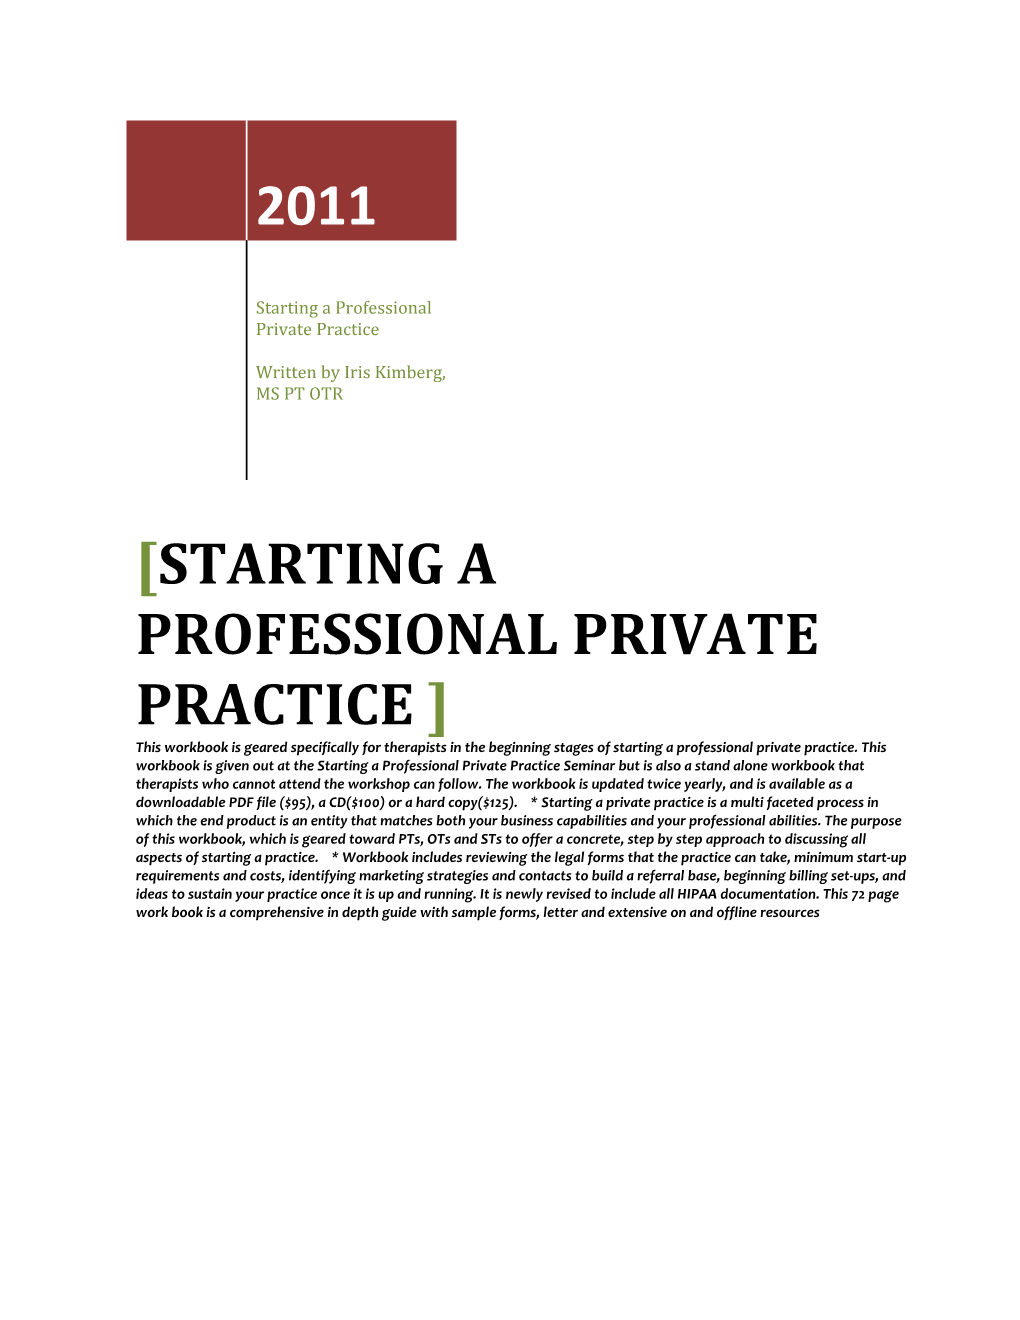 Starting A Professional Private Practice